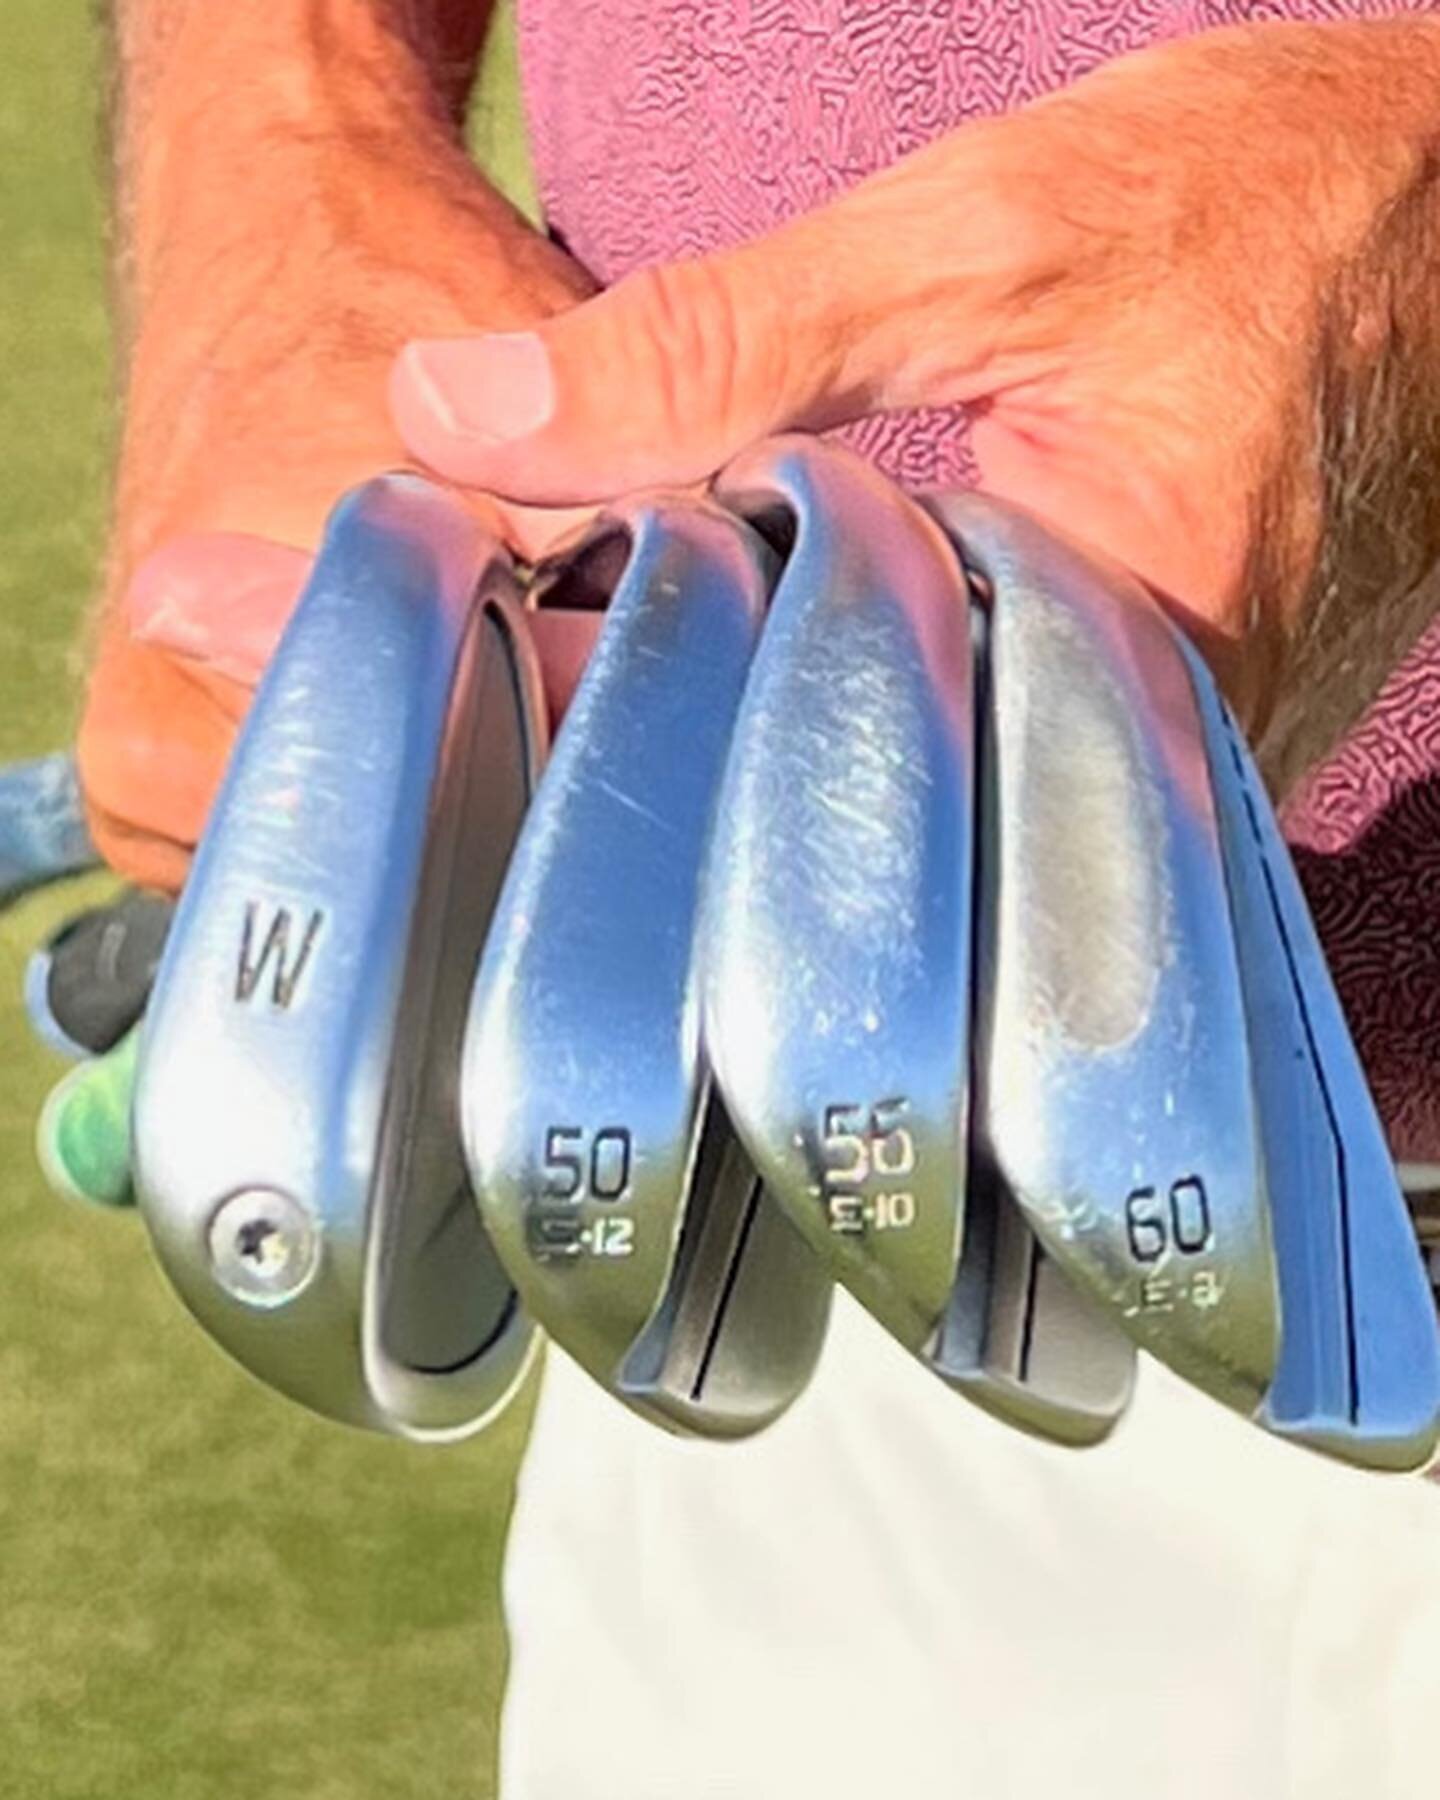 What&rsquo;s in my @pingtour bag right now when it comes to wedges? 
E Grind Glide 4 60 degree is at 58 degrees loft, 61.8 degree lie angle 

E Grind Glide 4 56 degree is at 53 degrees loft, 62 degree lie angle 

S Grind Glide 4 50 degree is at 49 de